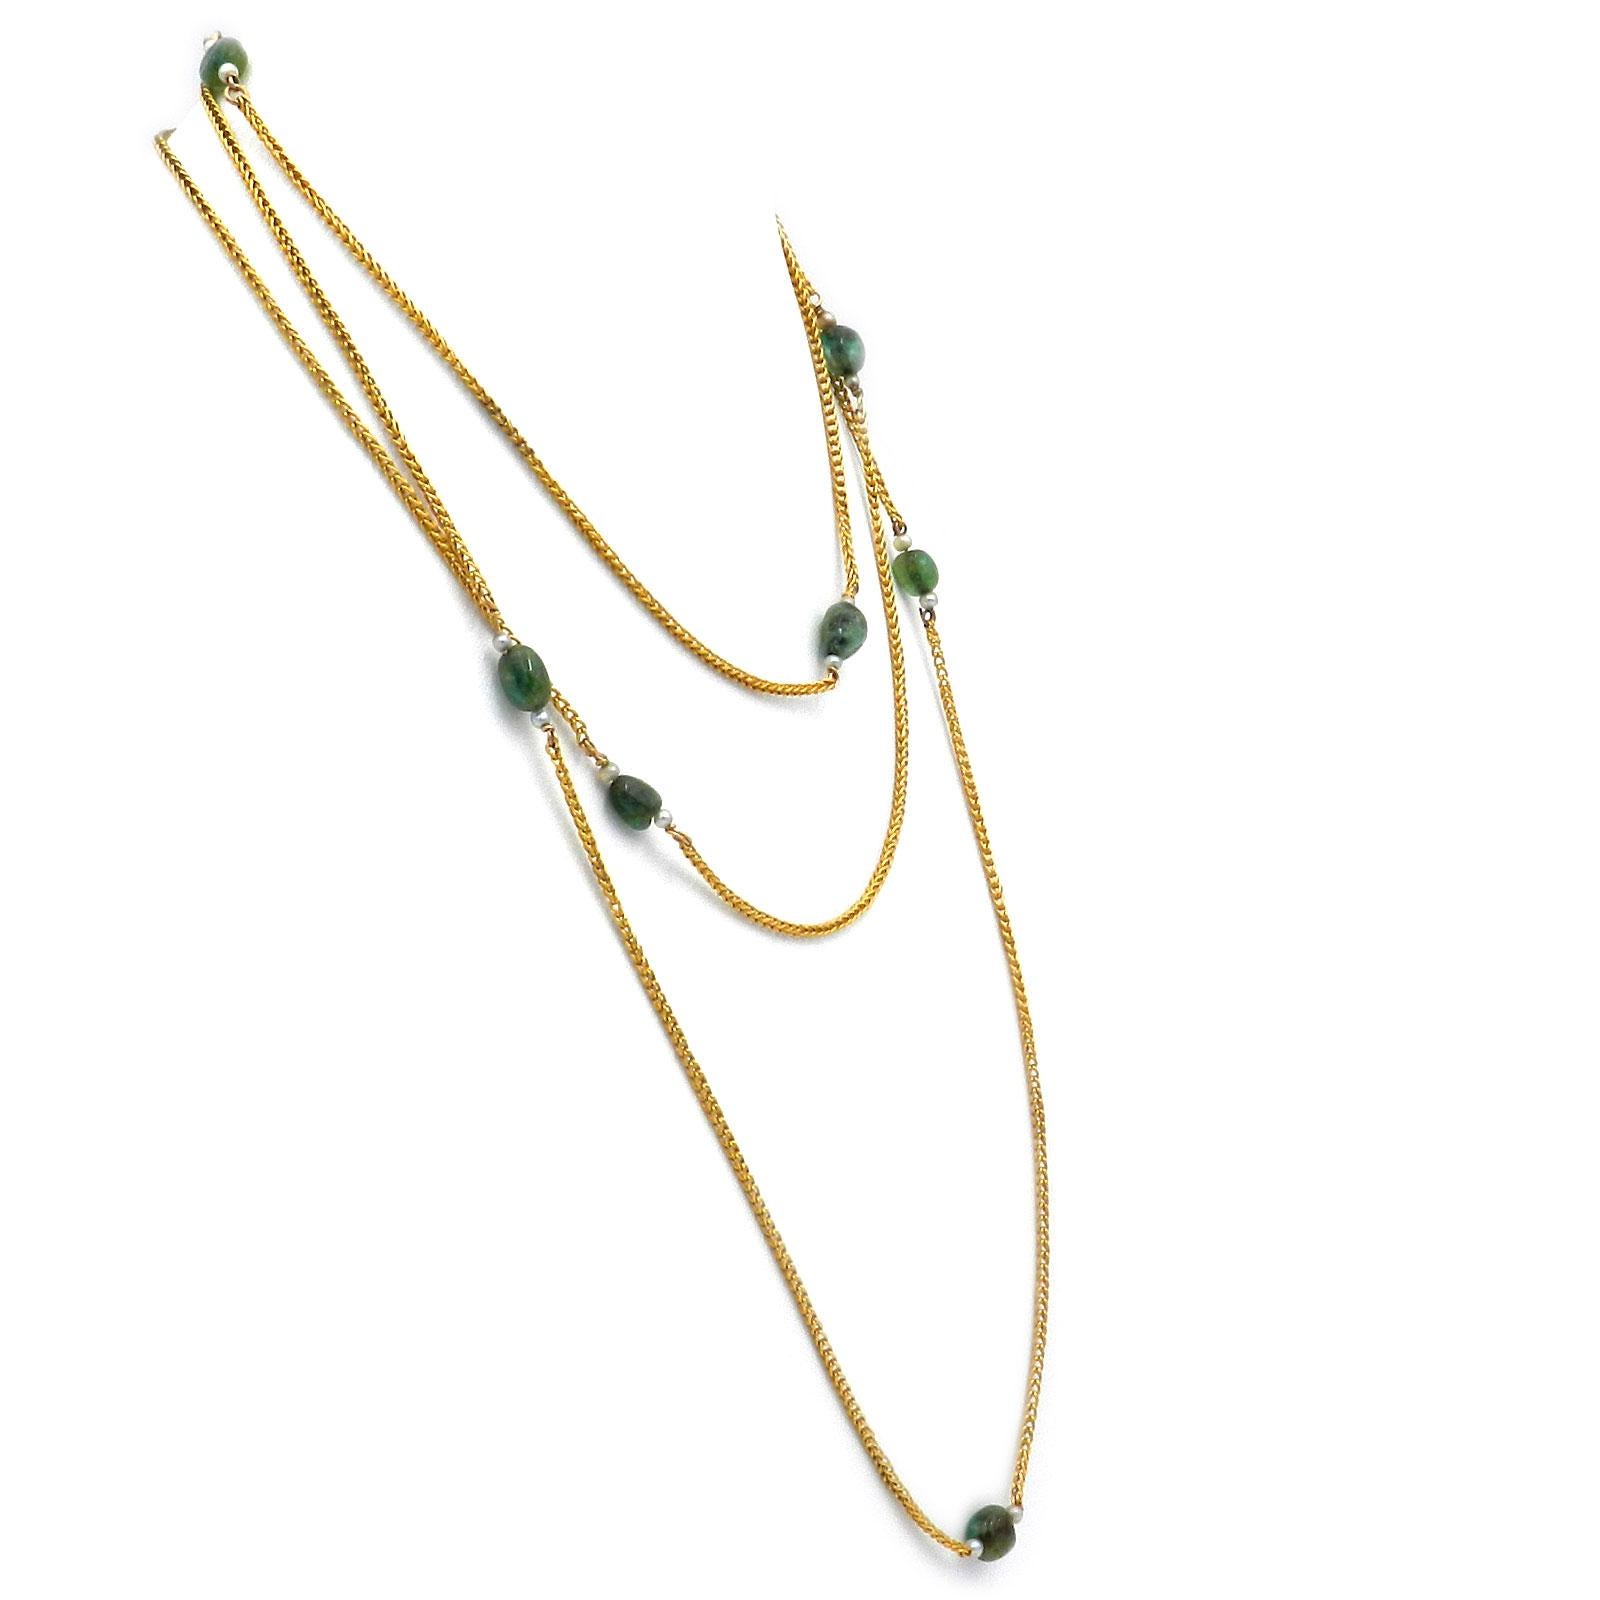 Art Nouveau 18K Gold Emerald and Oriental Pearl Chain Necklace, circa 1910

Elegant, extra-long foxtail chain made of 18K gold, decorated with nine emeralds, each flanked by two oriental pearls. 


18K yellow gold
9 emerald oval stones, approx. 6 x